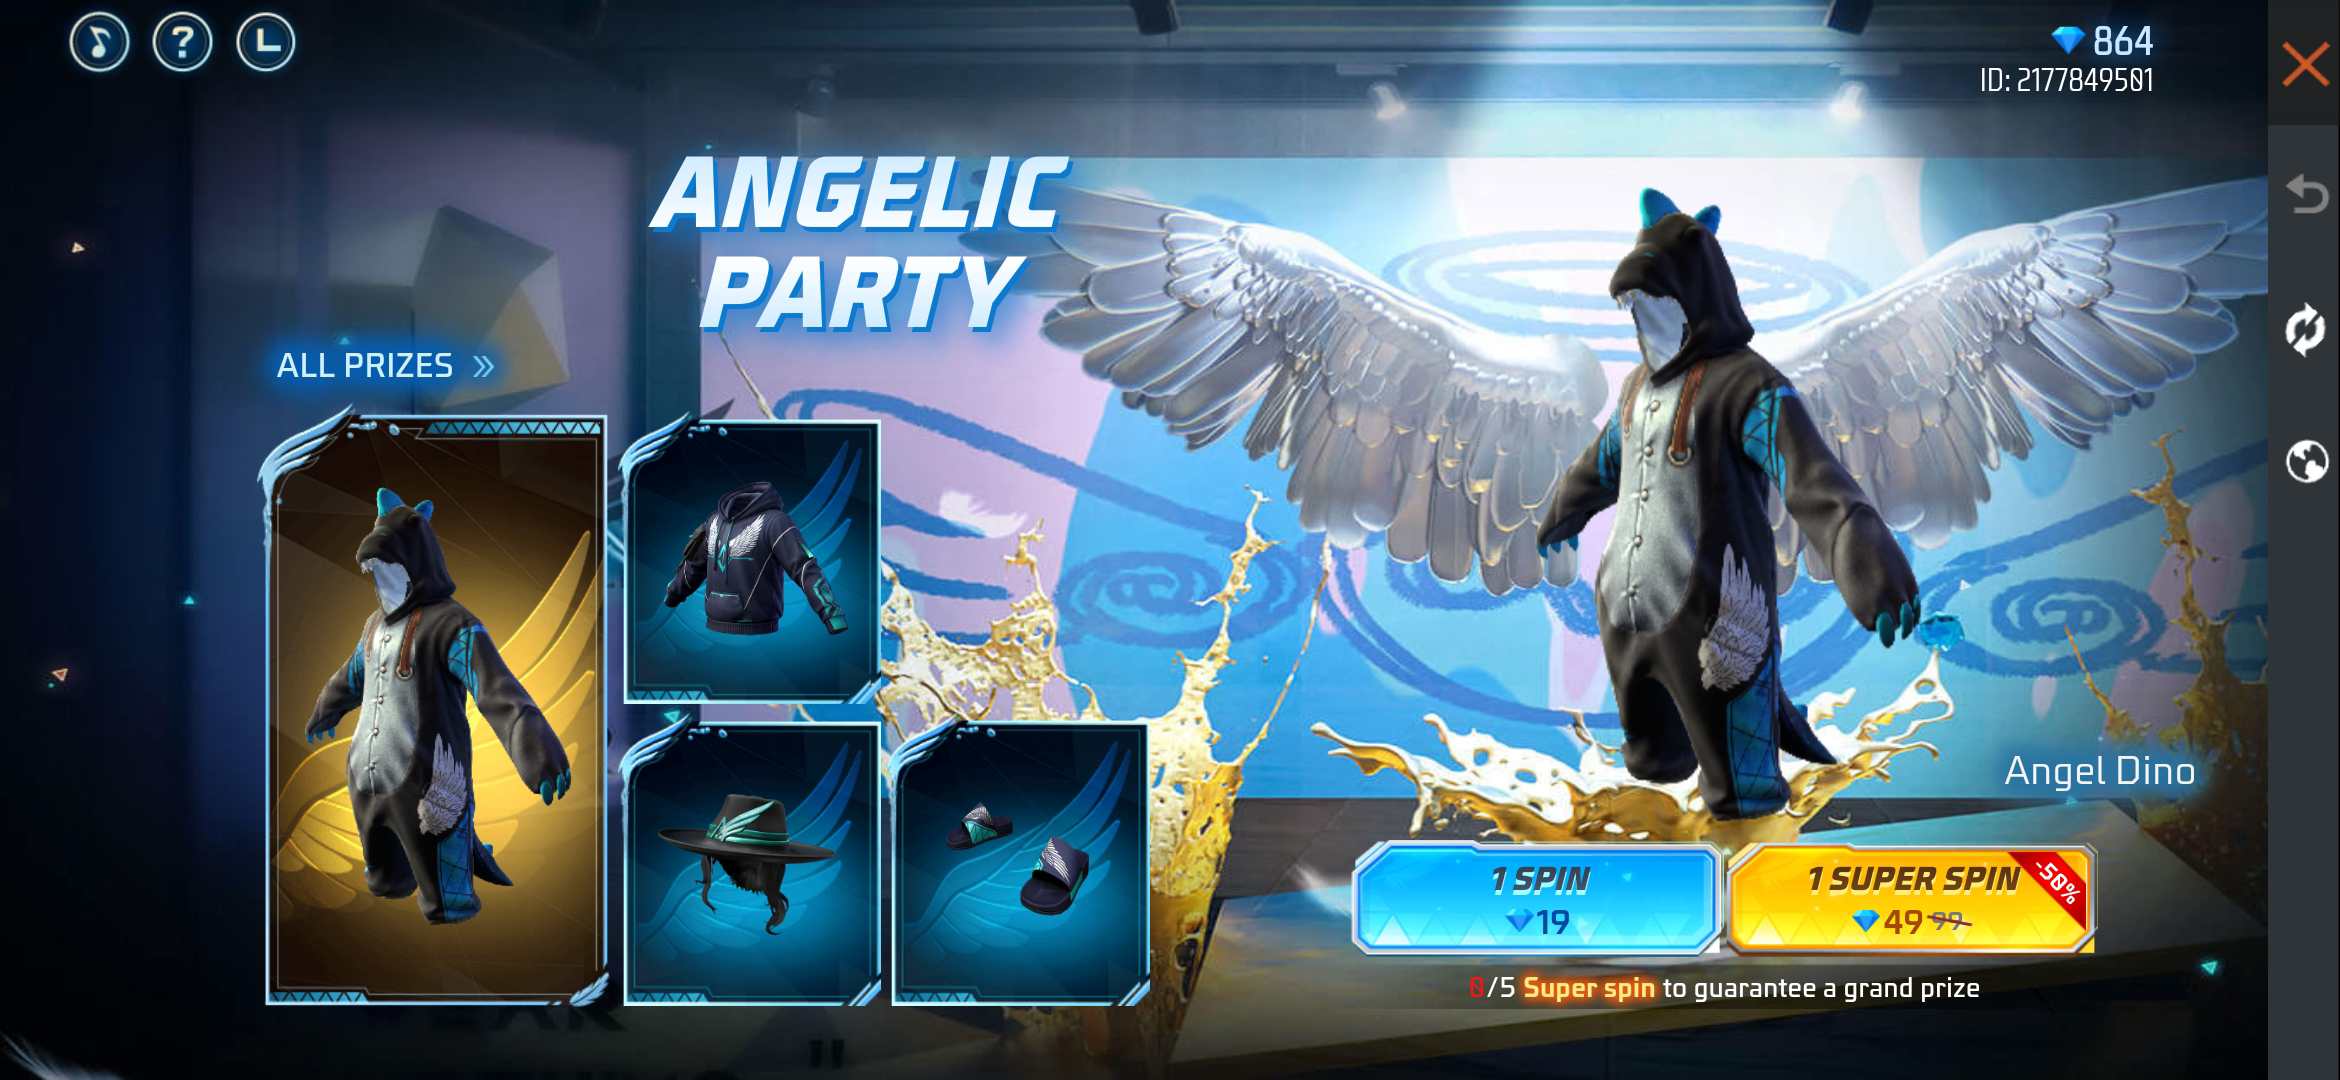 How To Get Sky Angelic Costume In Free Fire